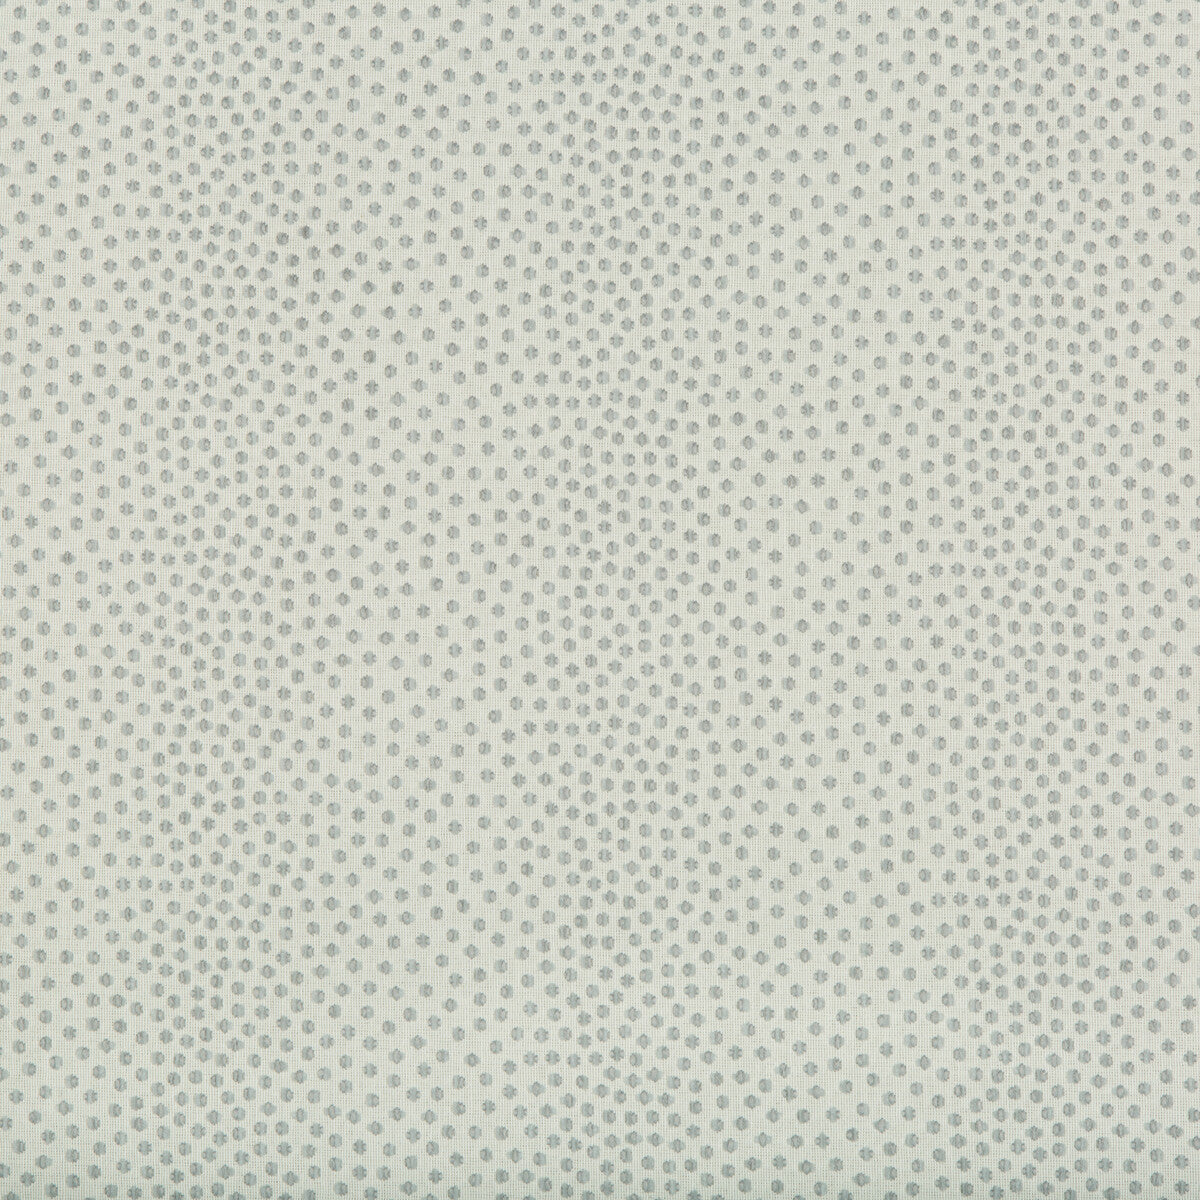 Kravet Design fabric in 34710-1611 color - pattern 34710.1611.0 - by Kravet Design in the Performance Crypton Home collection